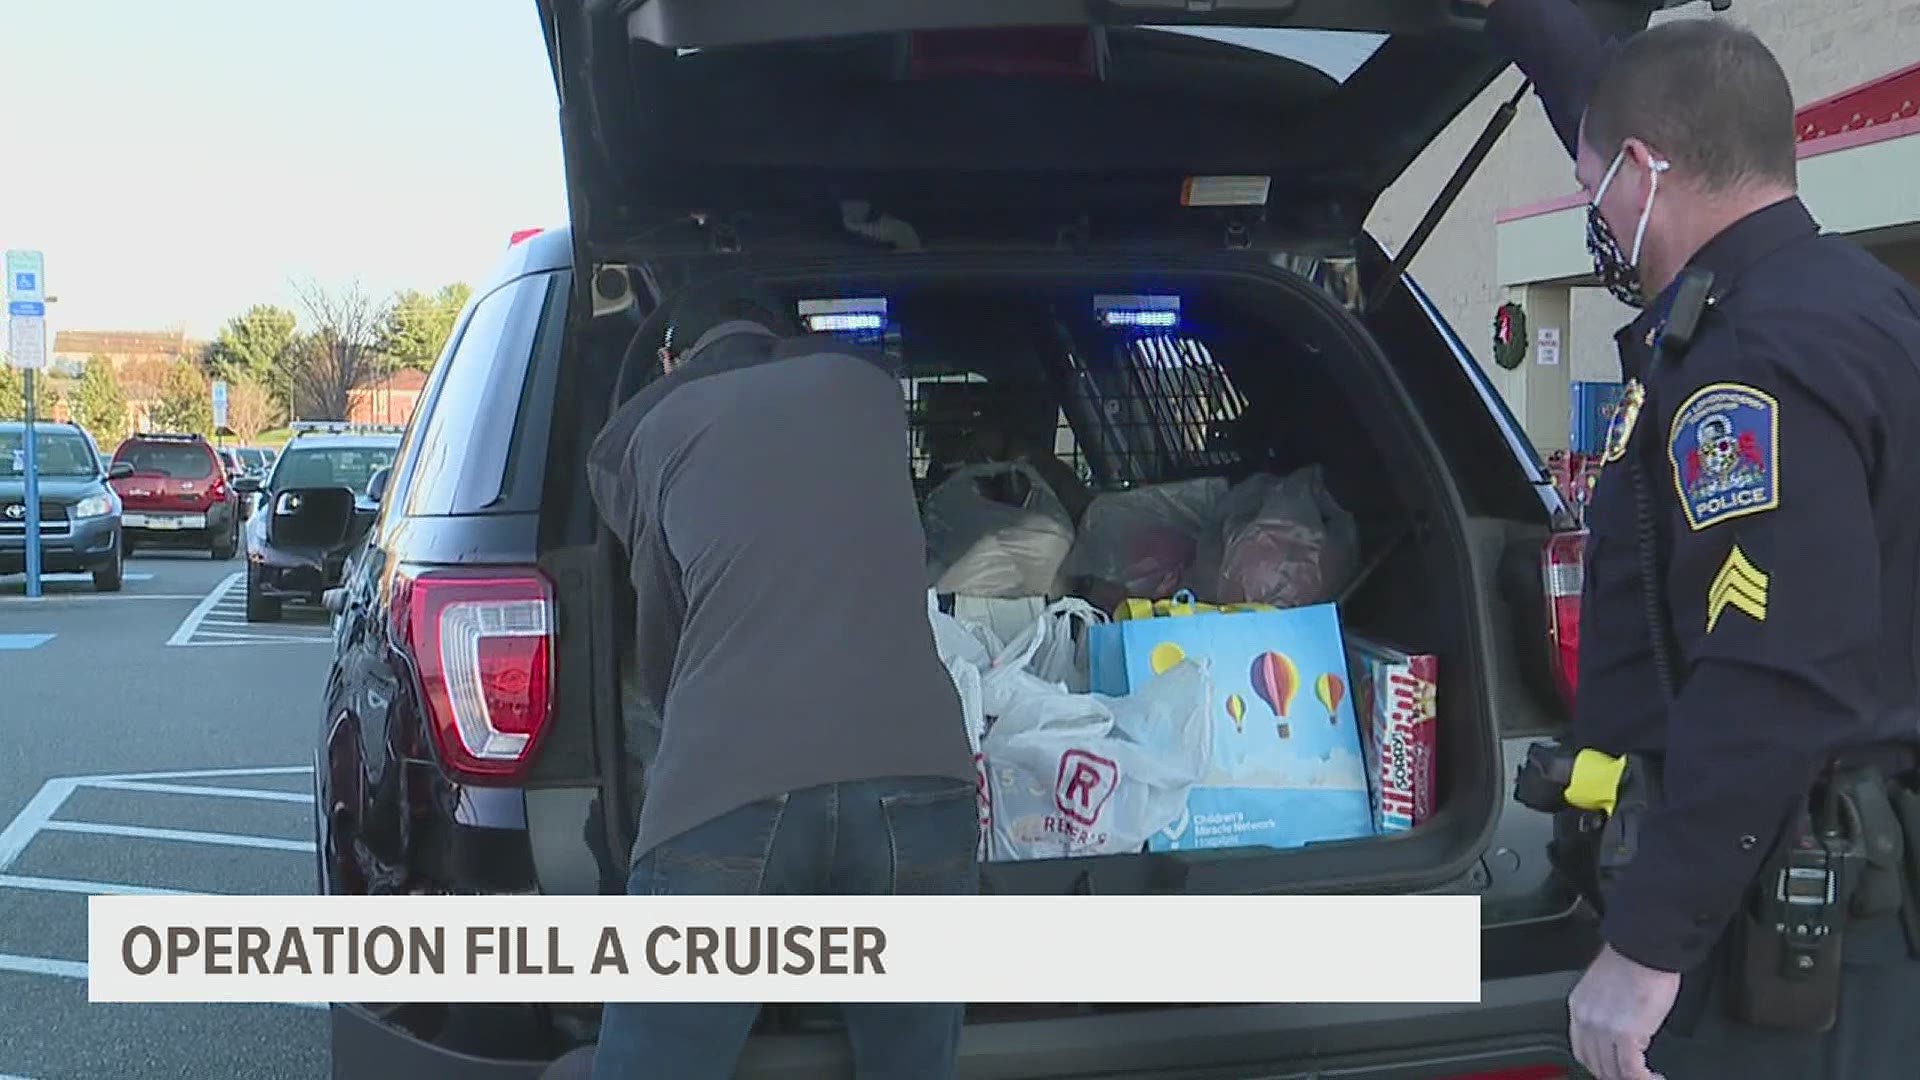 For the 7th year the South Londonderry Township Police Department collected food and toys for the community.